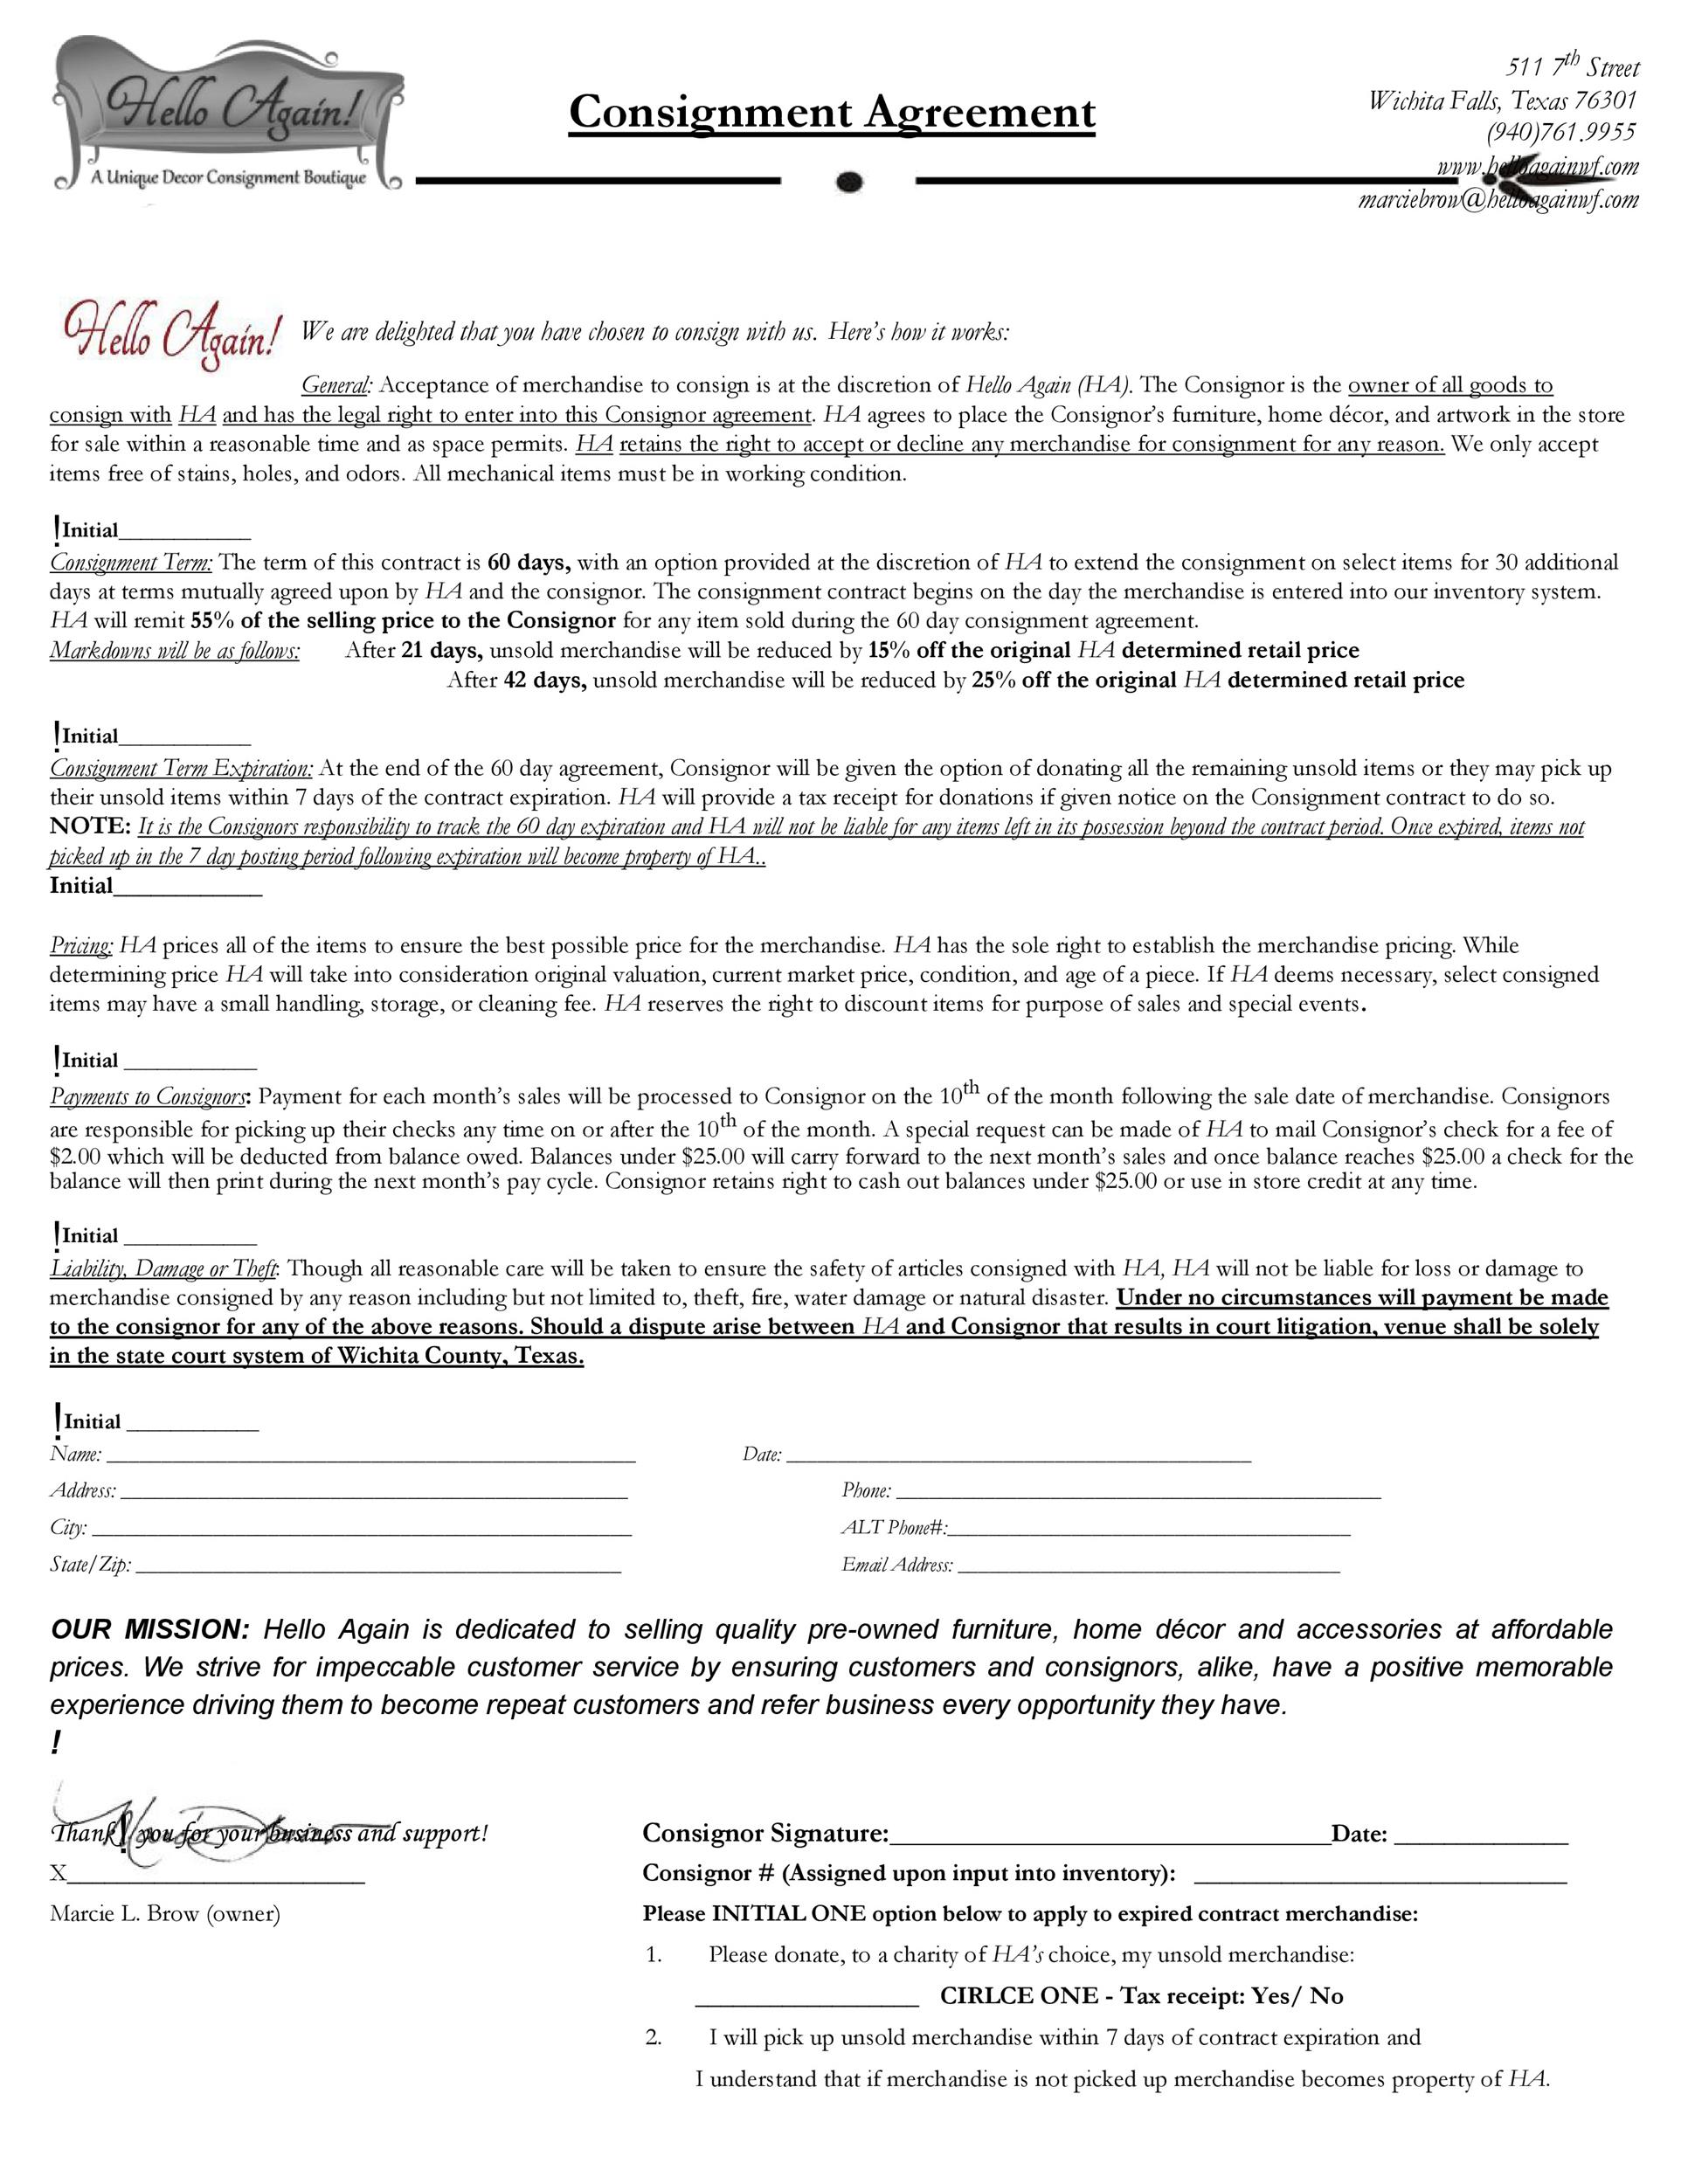 Free Consignment Agreement Template 23